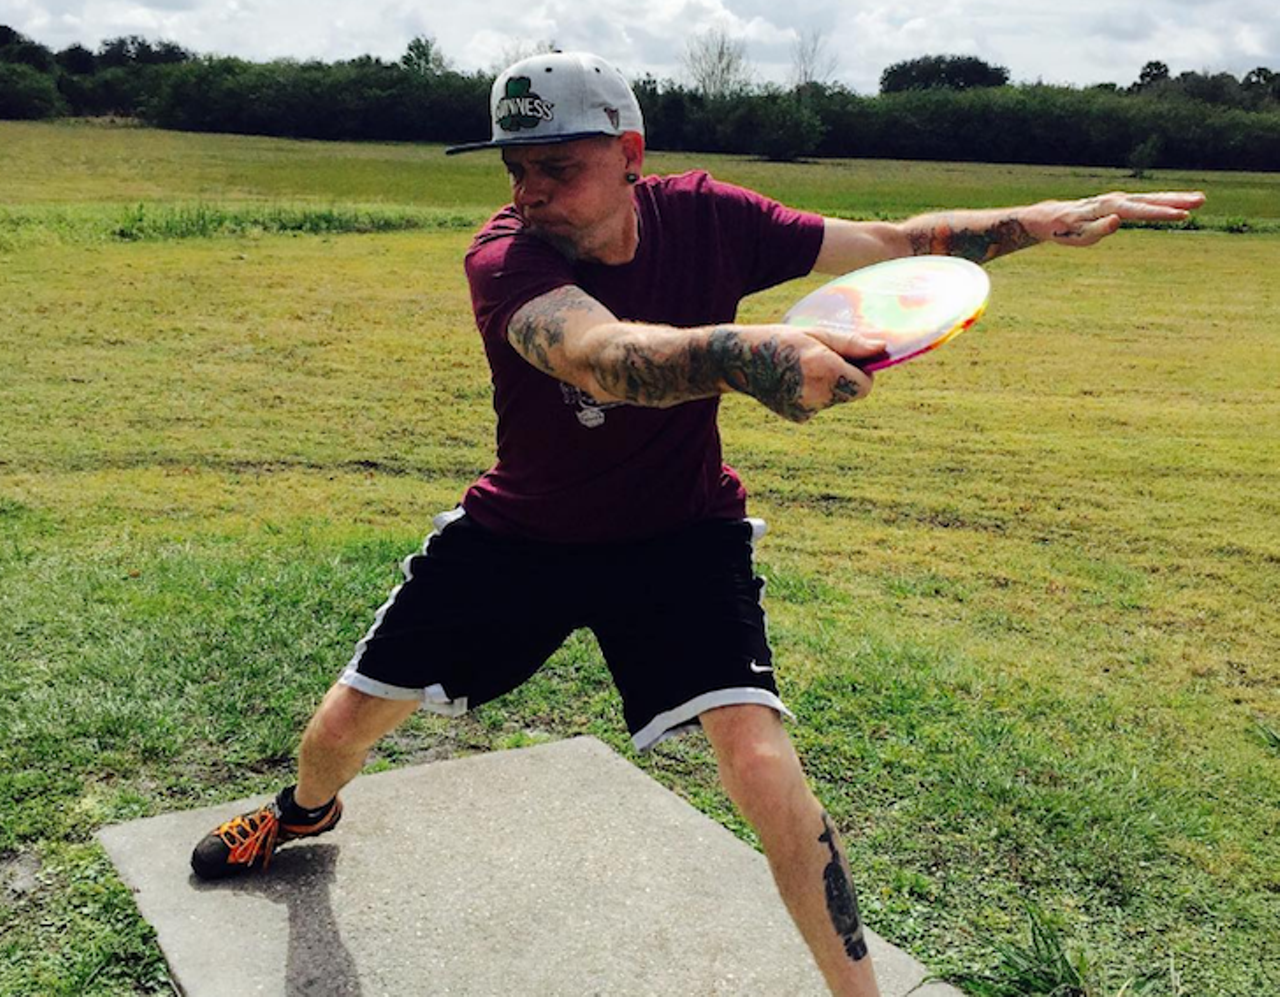 Orlando Disc Golf
Check website for locations and times 
Fees: $15 annually 
This group sets up weekly meet-ups for frisbee golfers looking for a foursome to forehand with or perhaps a league to gauge your skills in. This club hosts several events including the Barnett Park Championships. 
Photo via chrisrussel_tattoos/Instagram